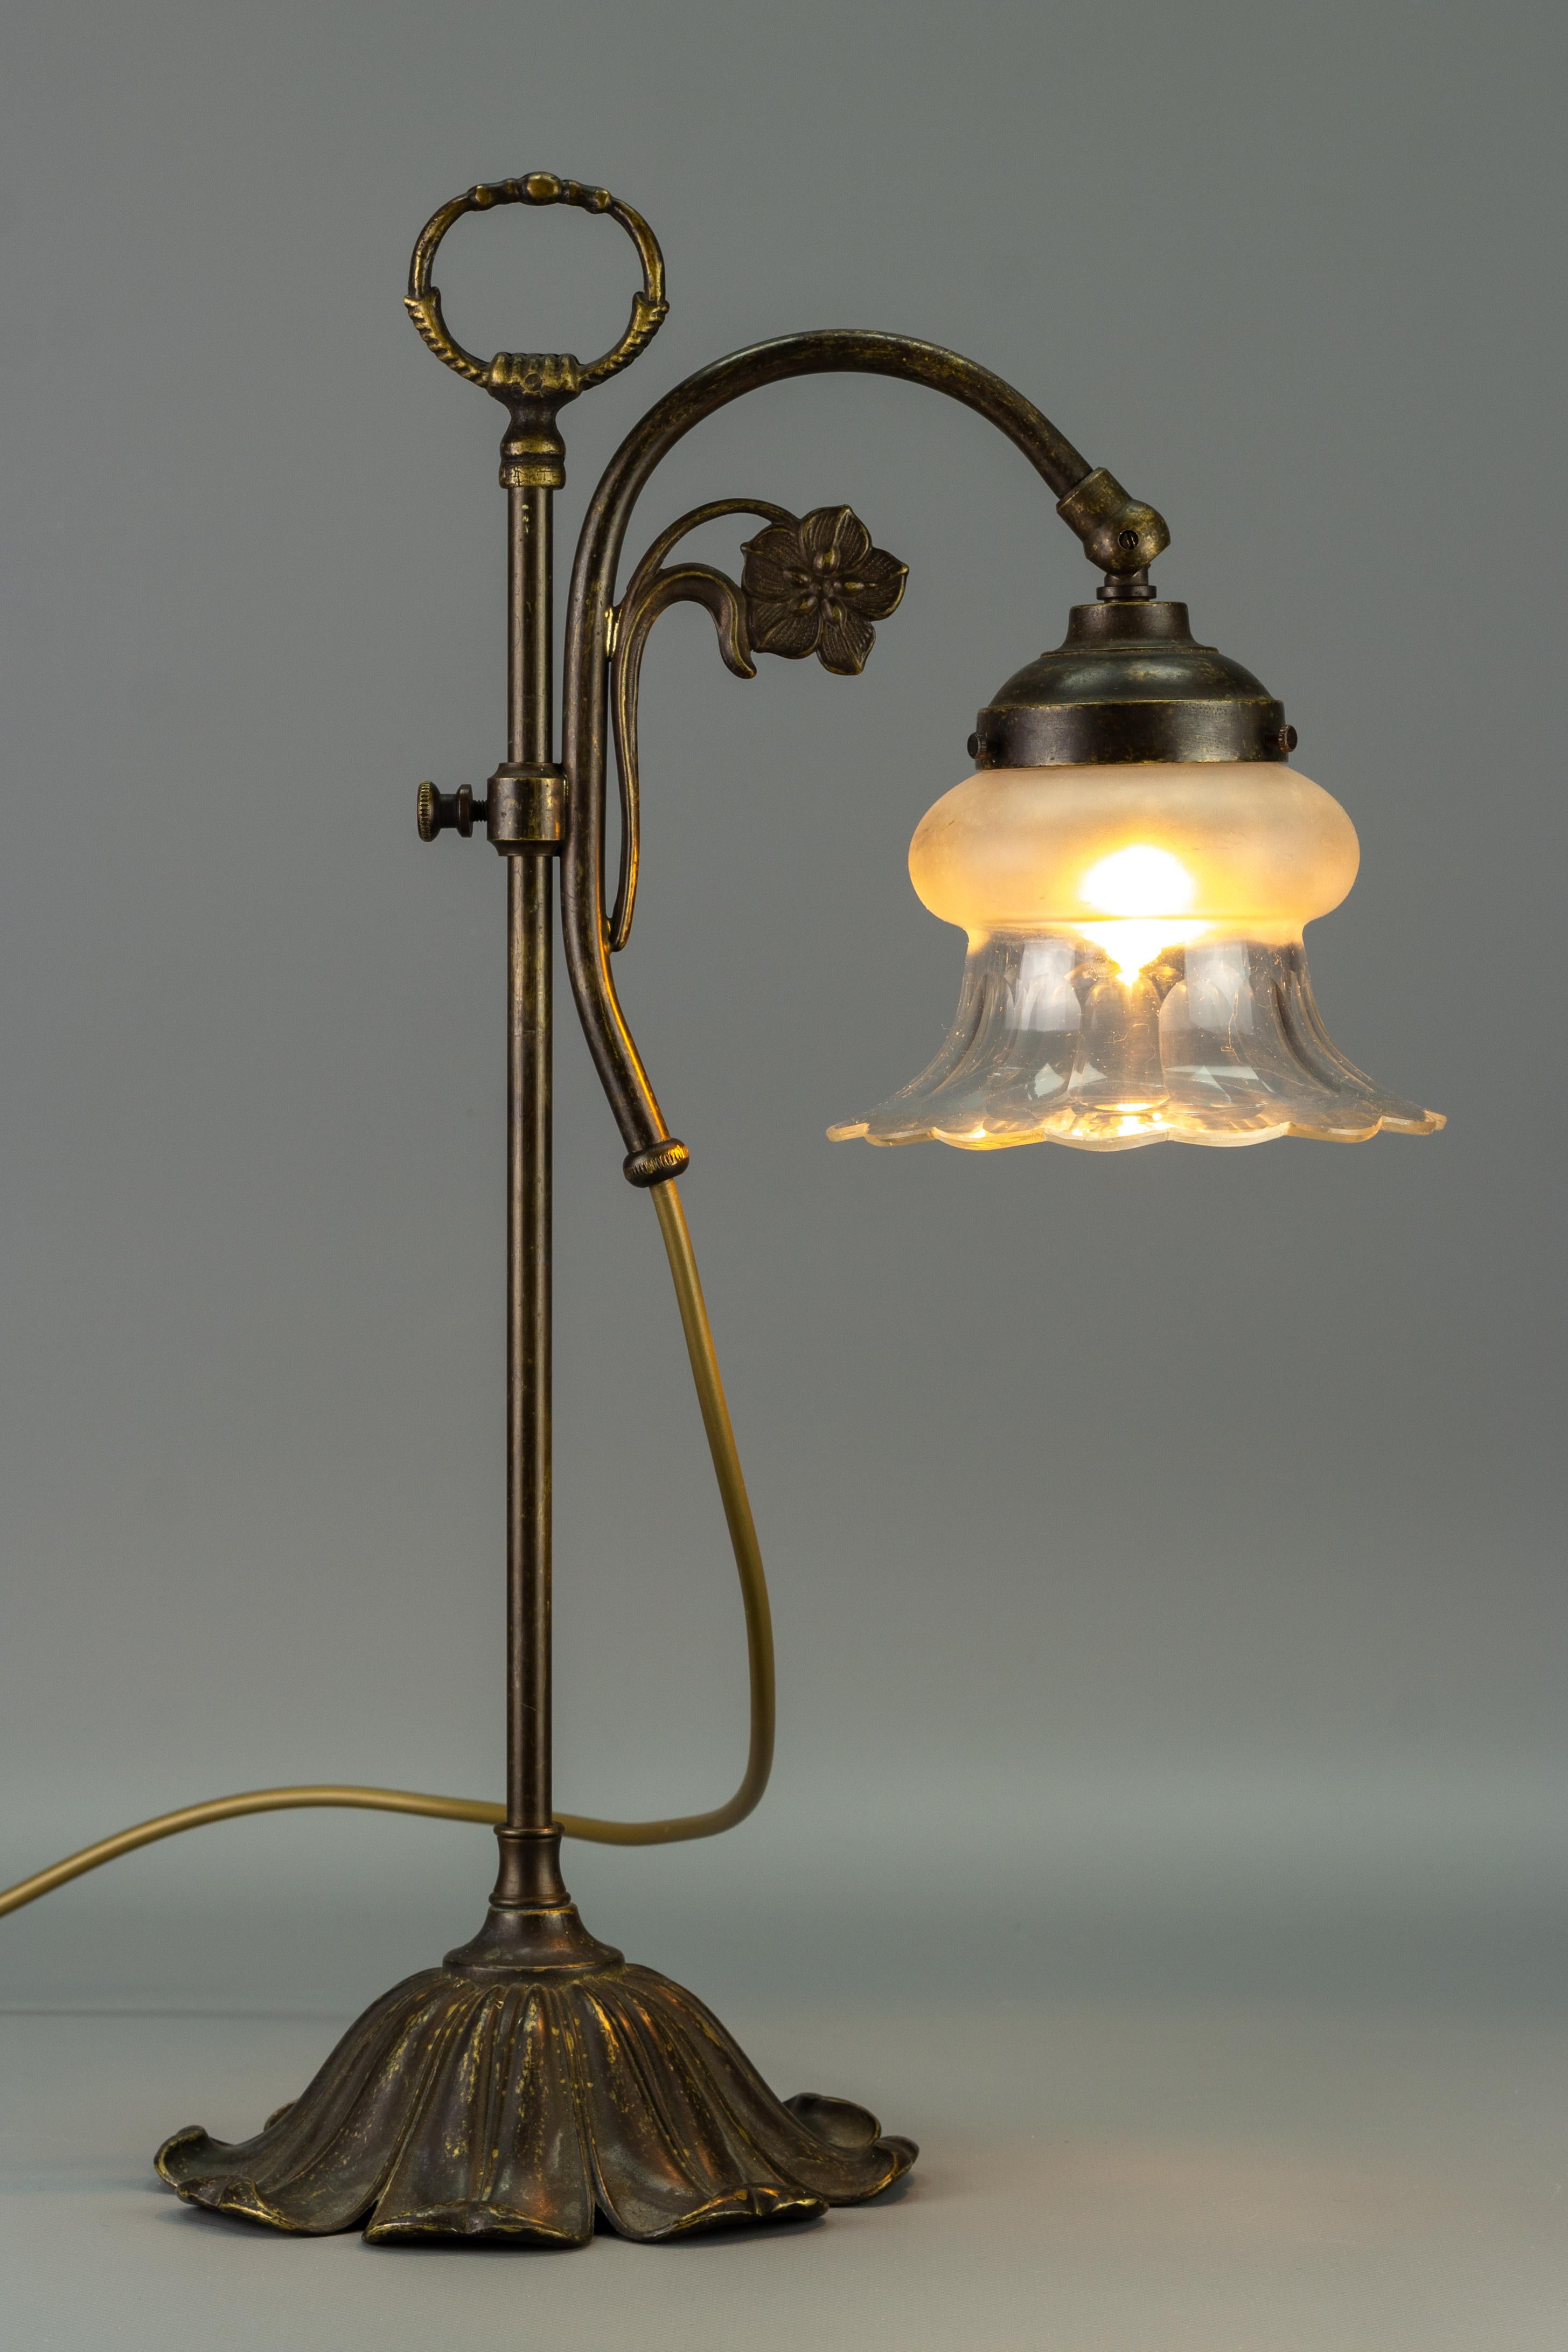 An adorable Art Nouveau-style vintage table lamp made of brass and metal, adorned with floral decor. The base is in the shape of flower petals; the glass shade is partially frosted and translucent. The height of this beautiful table lamp is